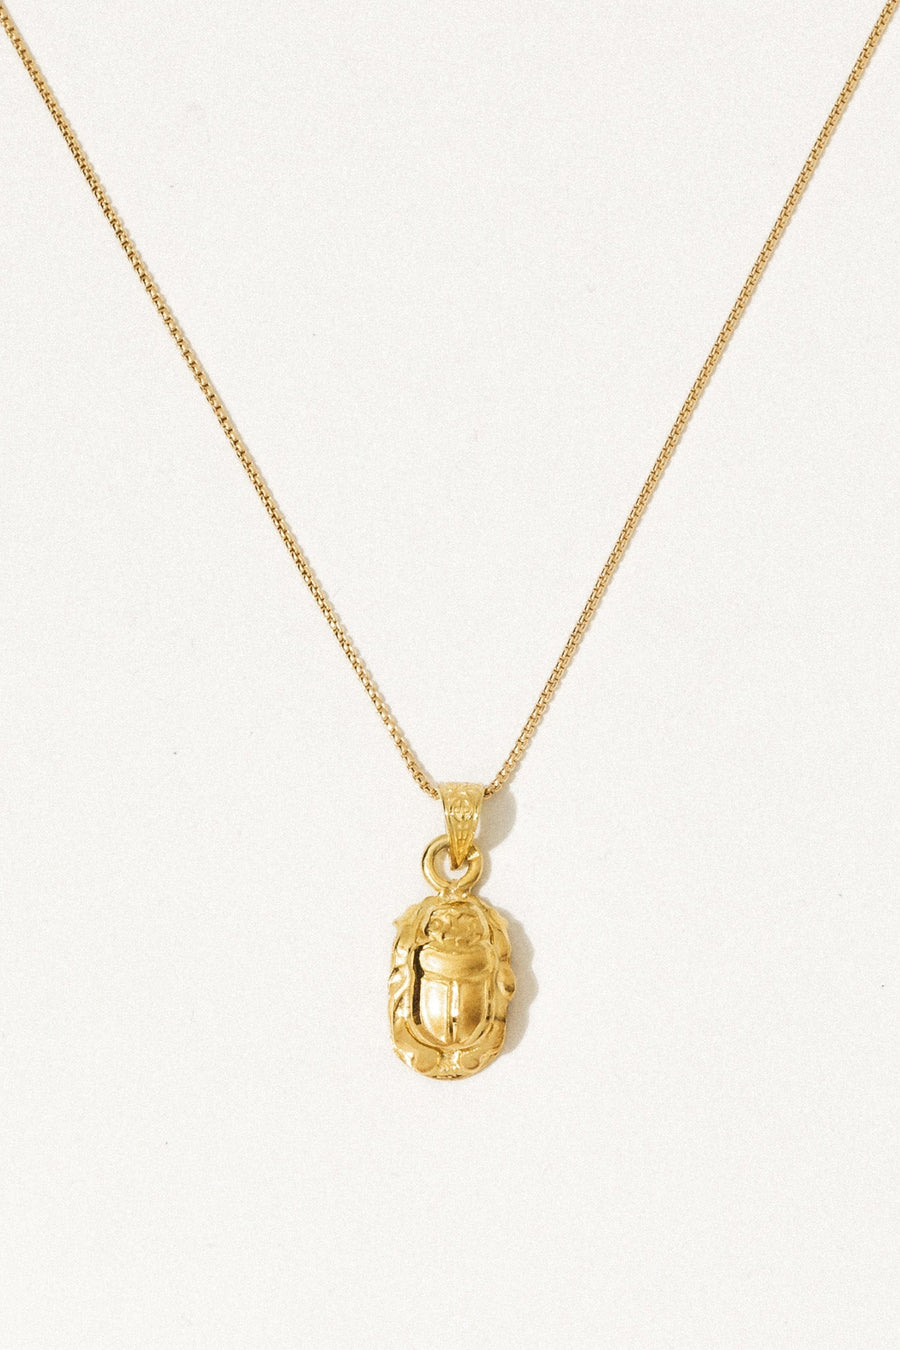 CGM Jewelry Gold / 22 inches Scarab Beetle Necklace